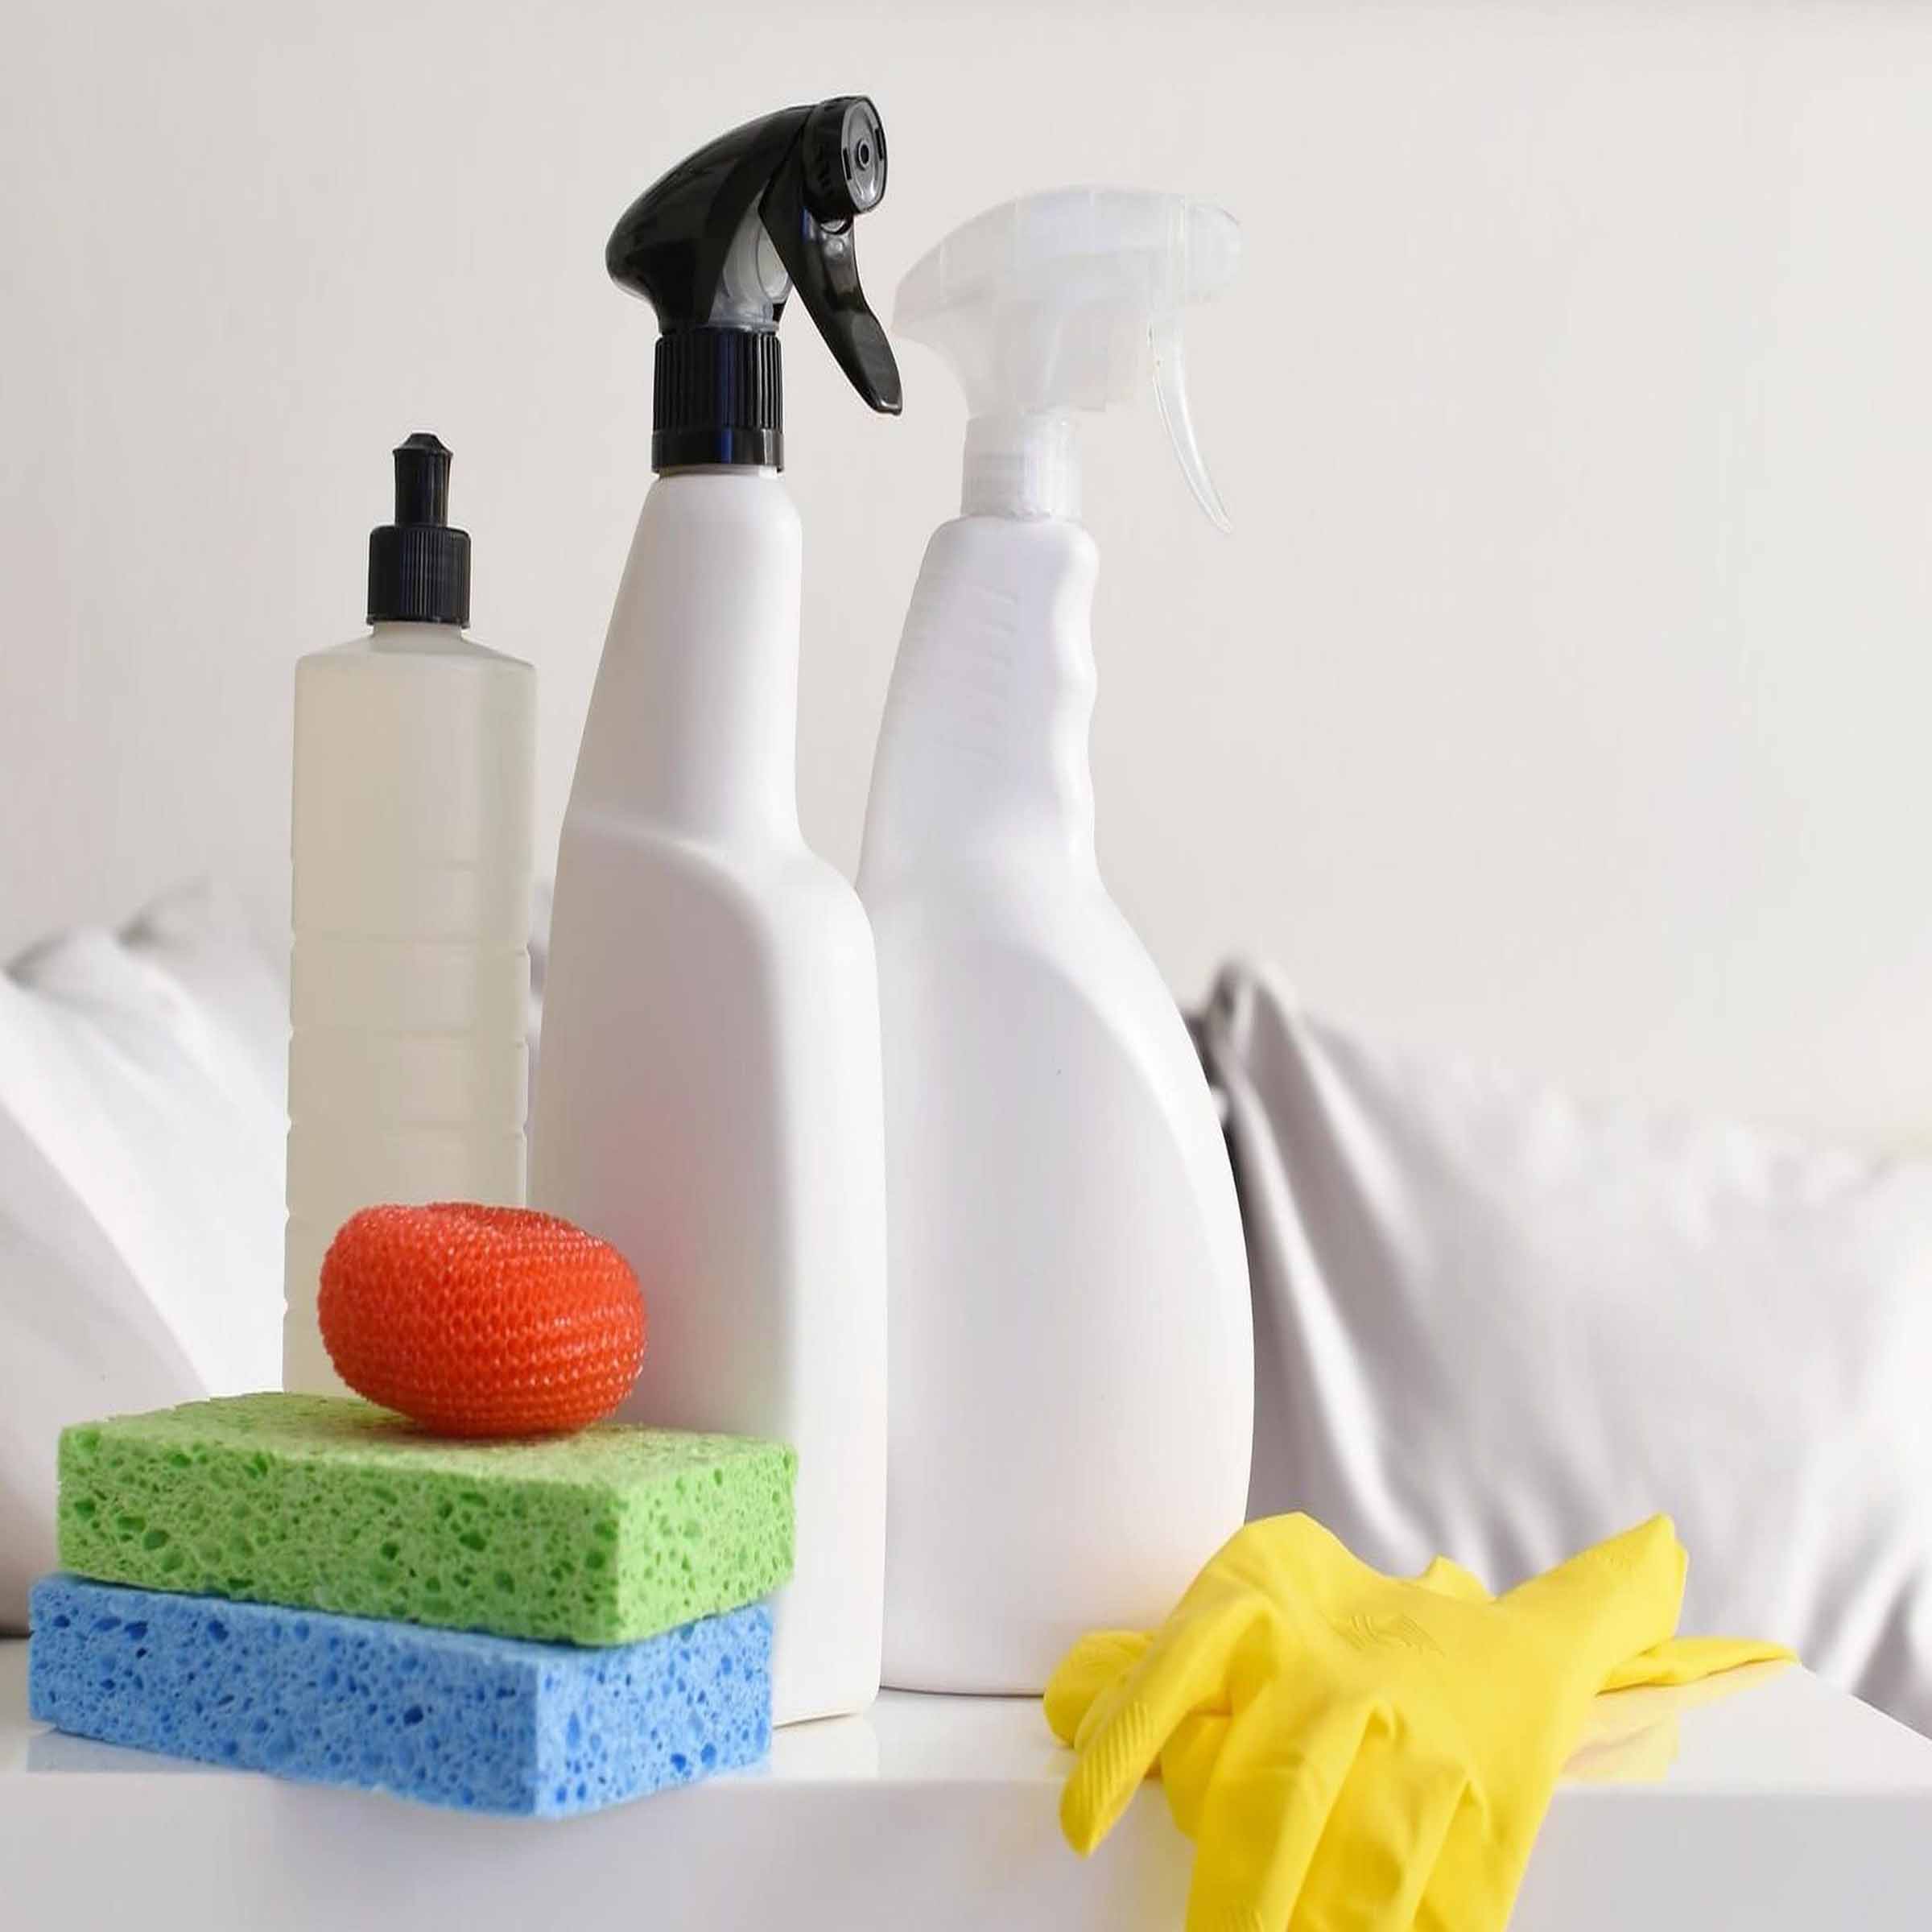 How Much Does Molly Maid Cleaning Service Cost